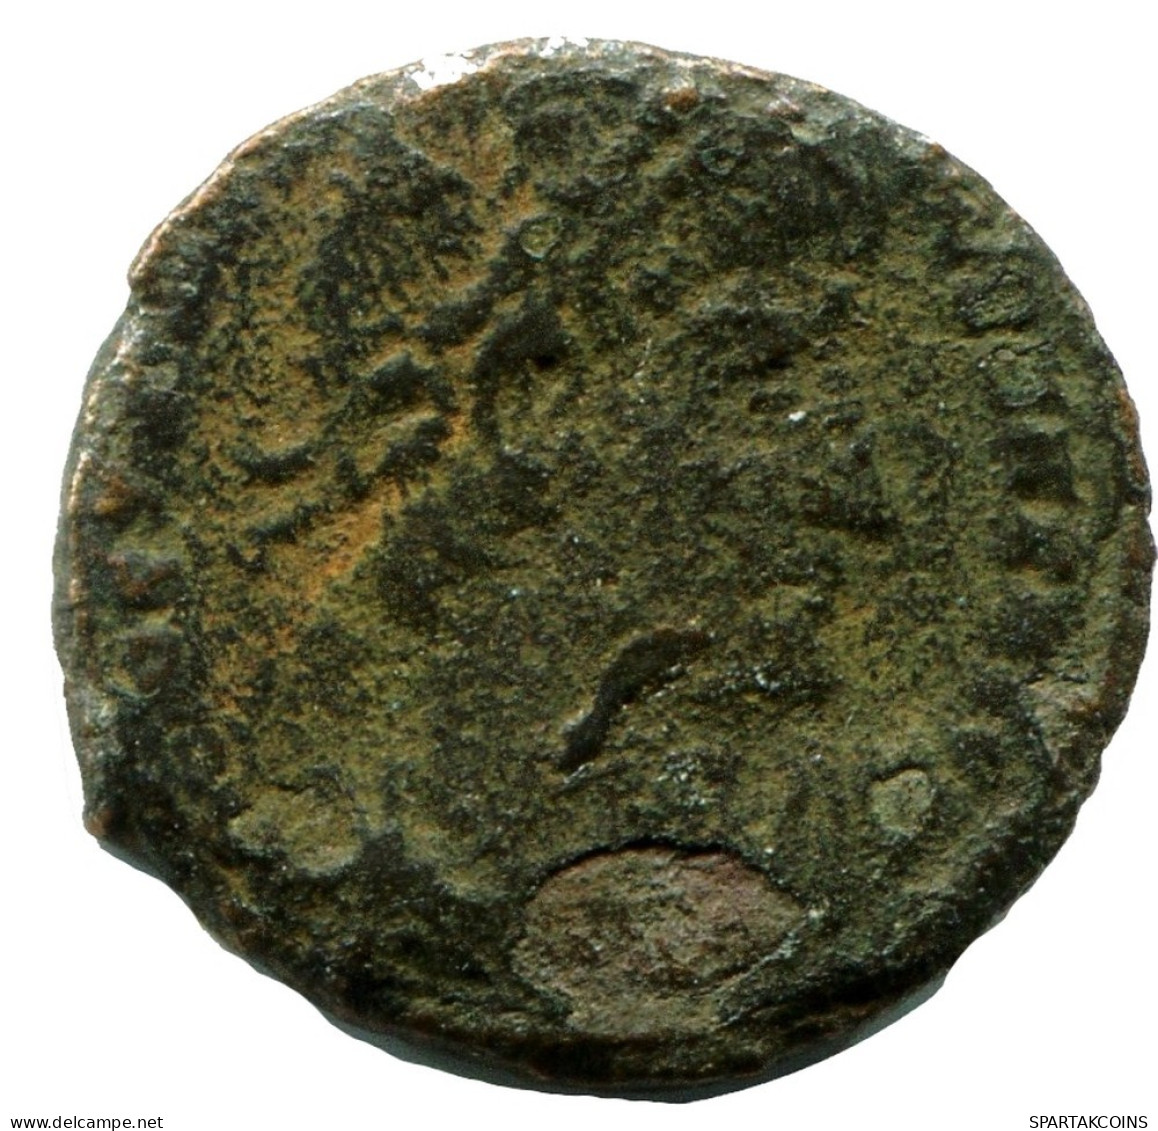 CONSTANTINE I MINTED IN CYZICUS FOUND IN IHNASYAH HOARD EGYPT #ANC11003.14.F.A - The Christian Empire (307 AD Tot 363 AD)